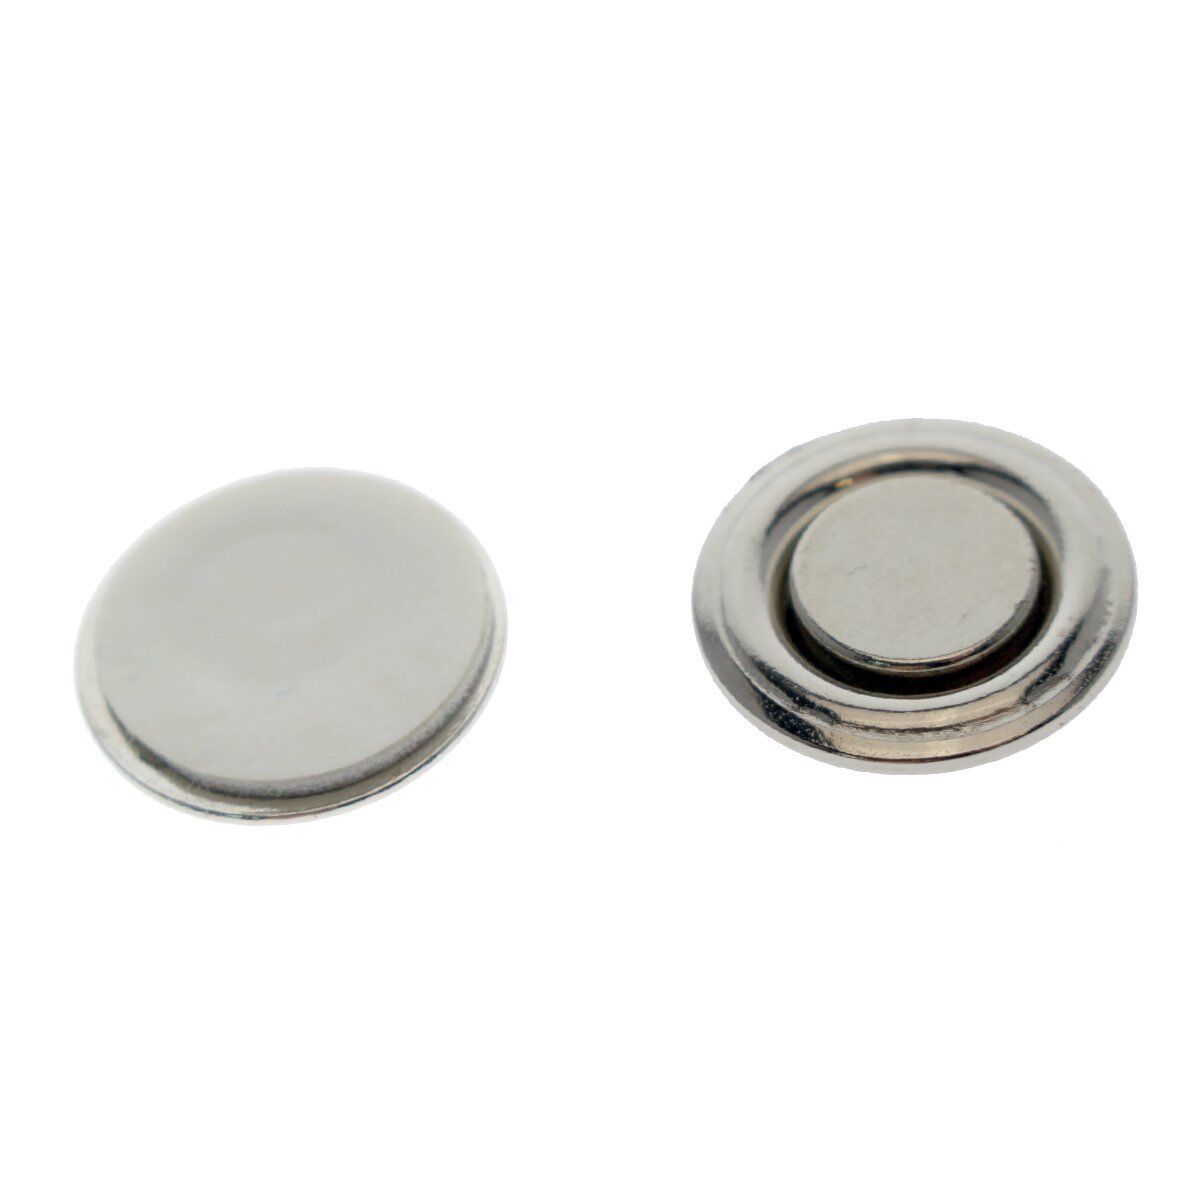 2 Pack - Small Round Button & Name Badge Magnets -Strong Magnetic Name Tag Back Specialist ID SPID-9510